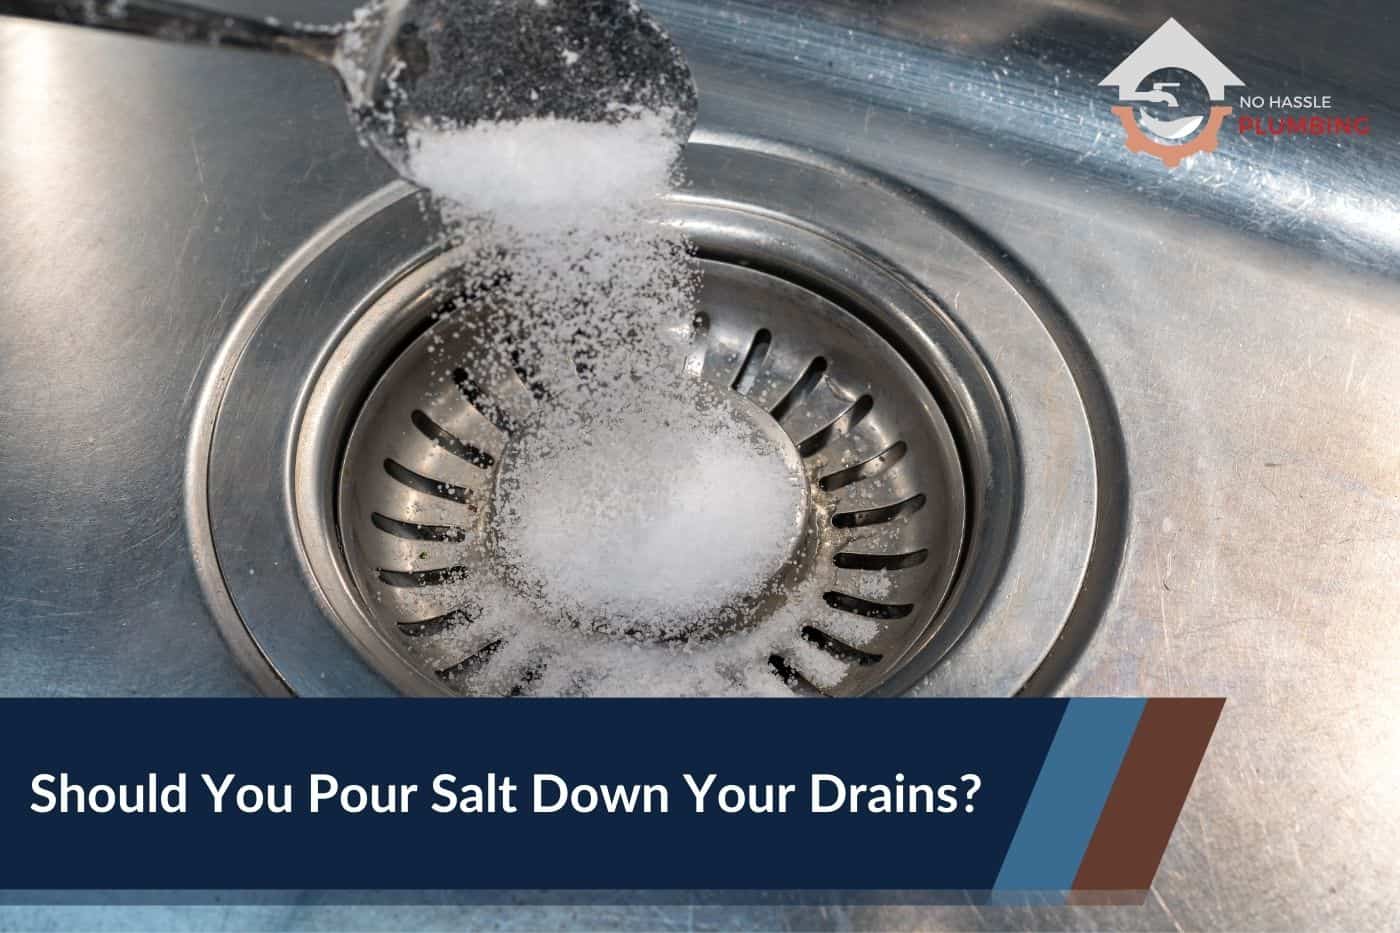 Should You Pour Salt Down Your Drains - No Hassle Plumbing.com Featured Image showing a tablespoon of salt being poured down a sink drain.